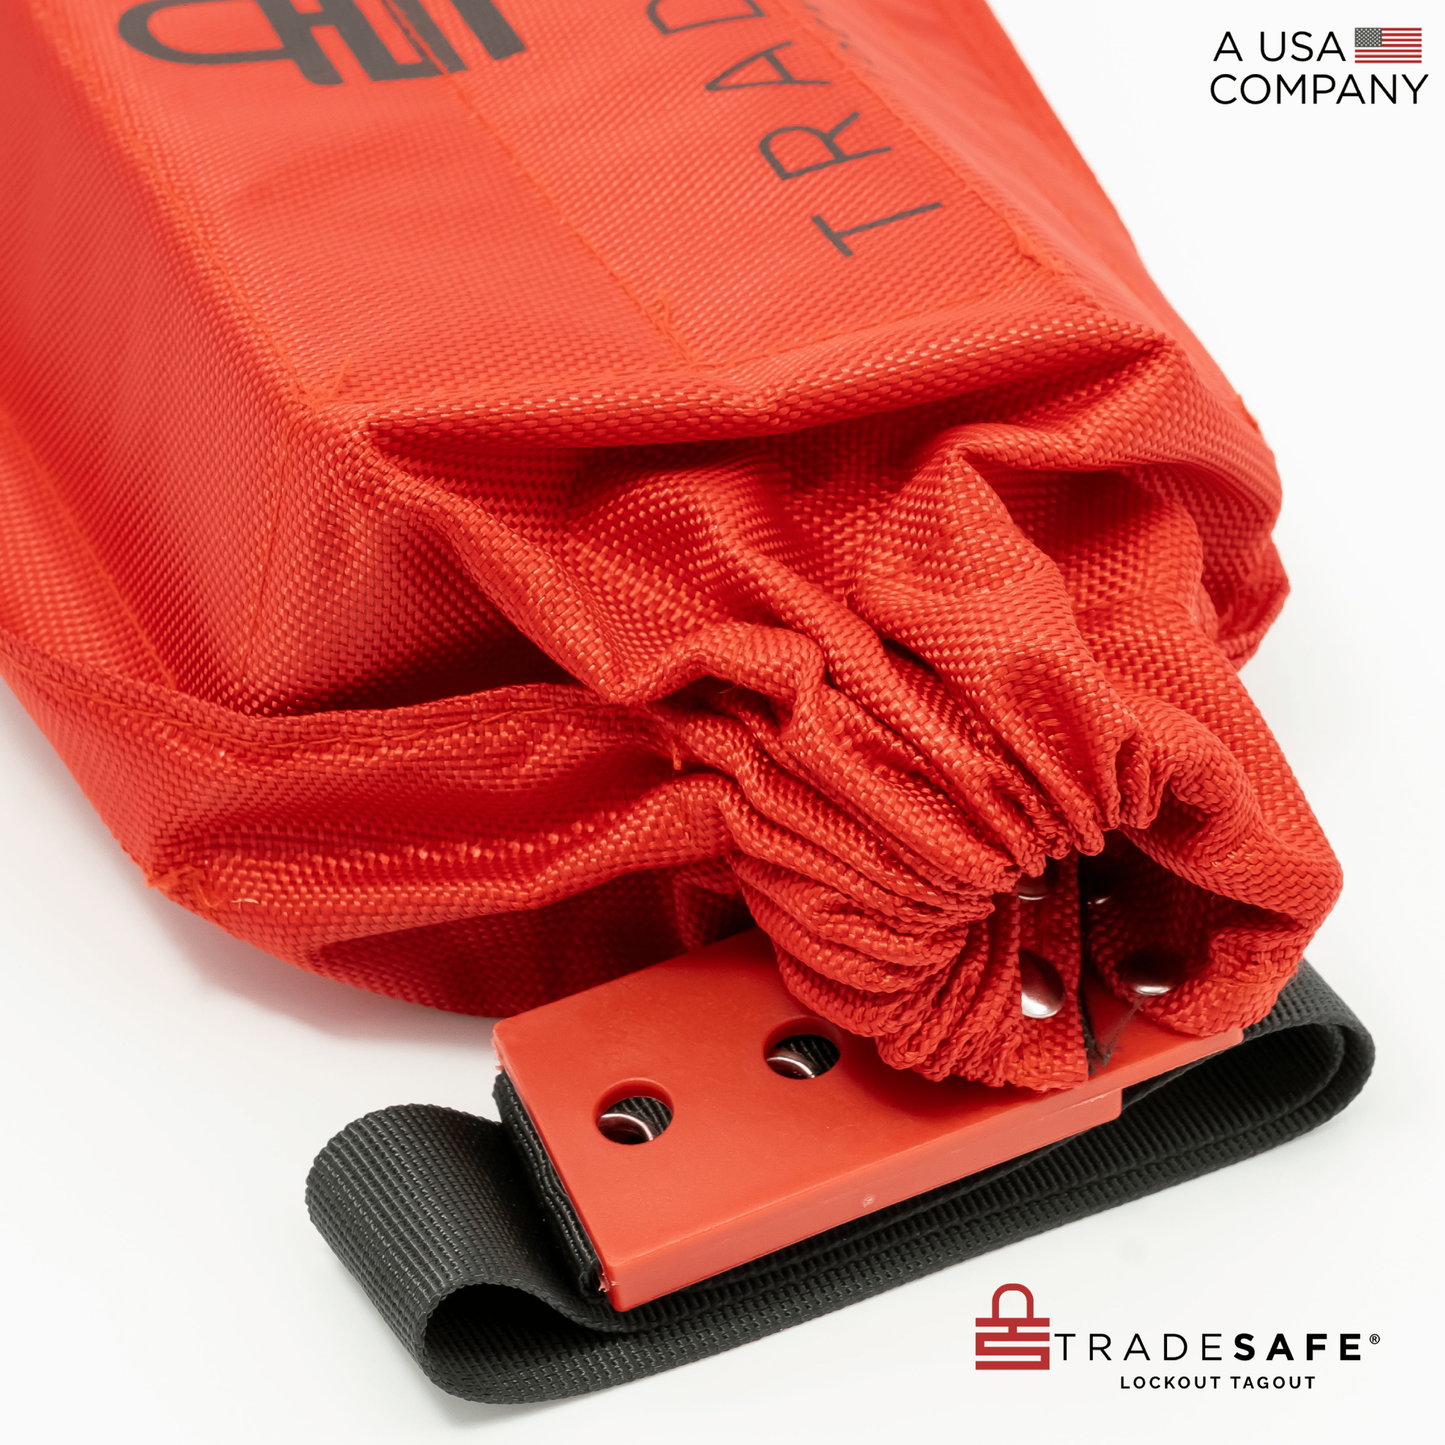 close-up view of lockout tagout cinch bag